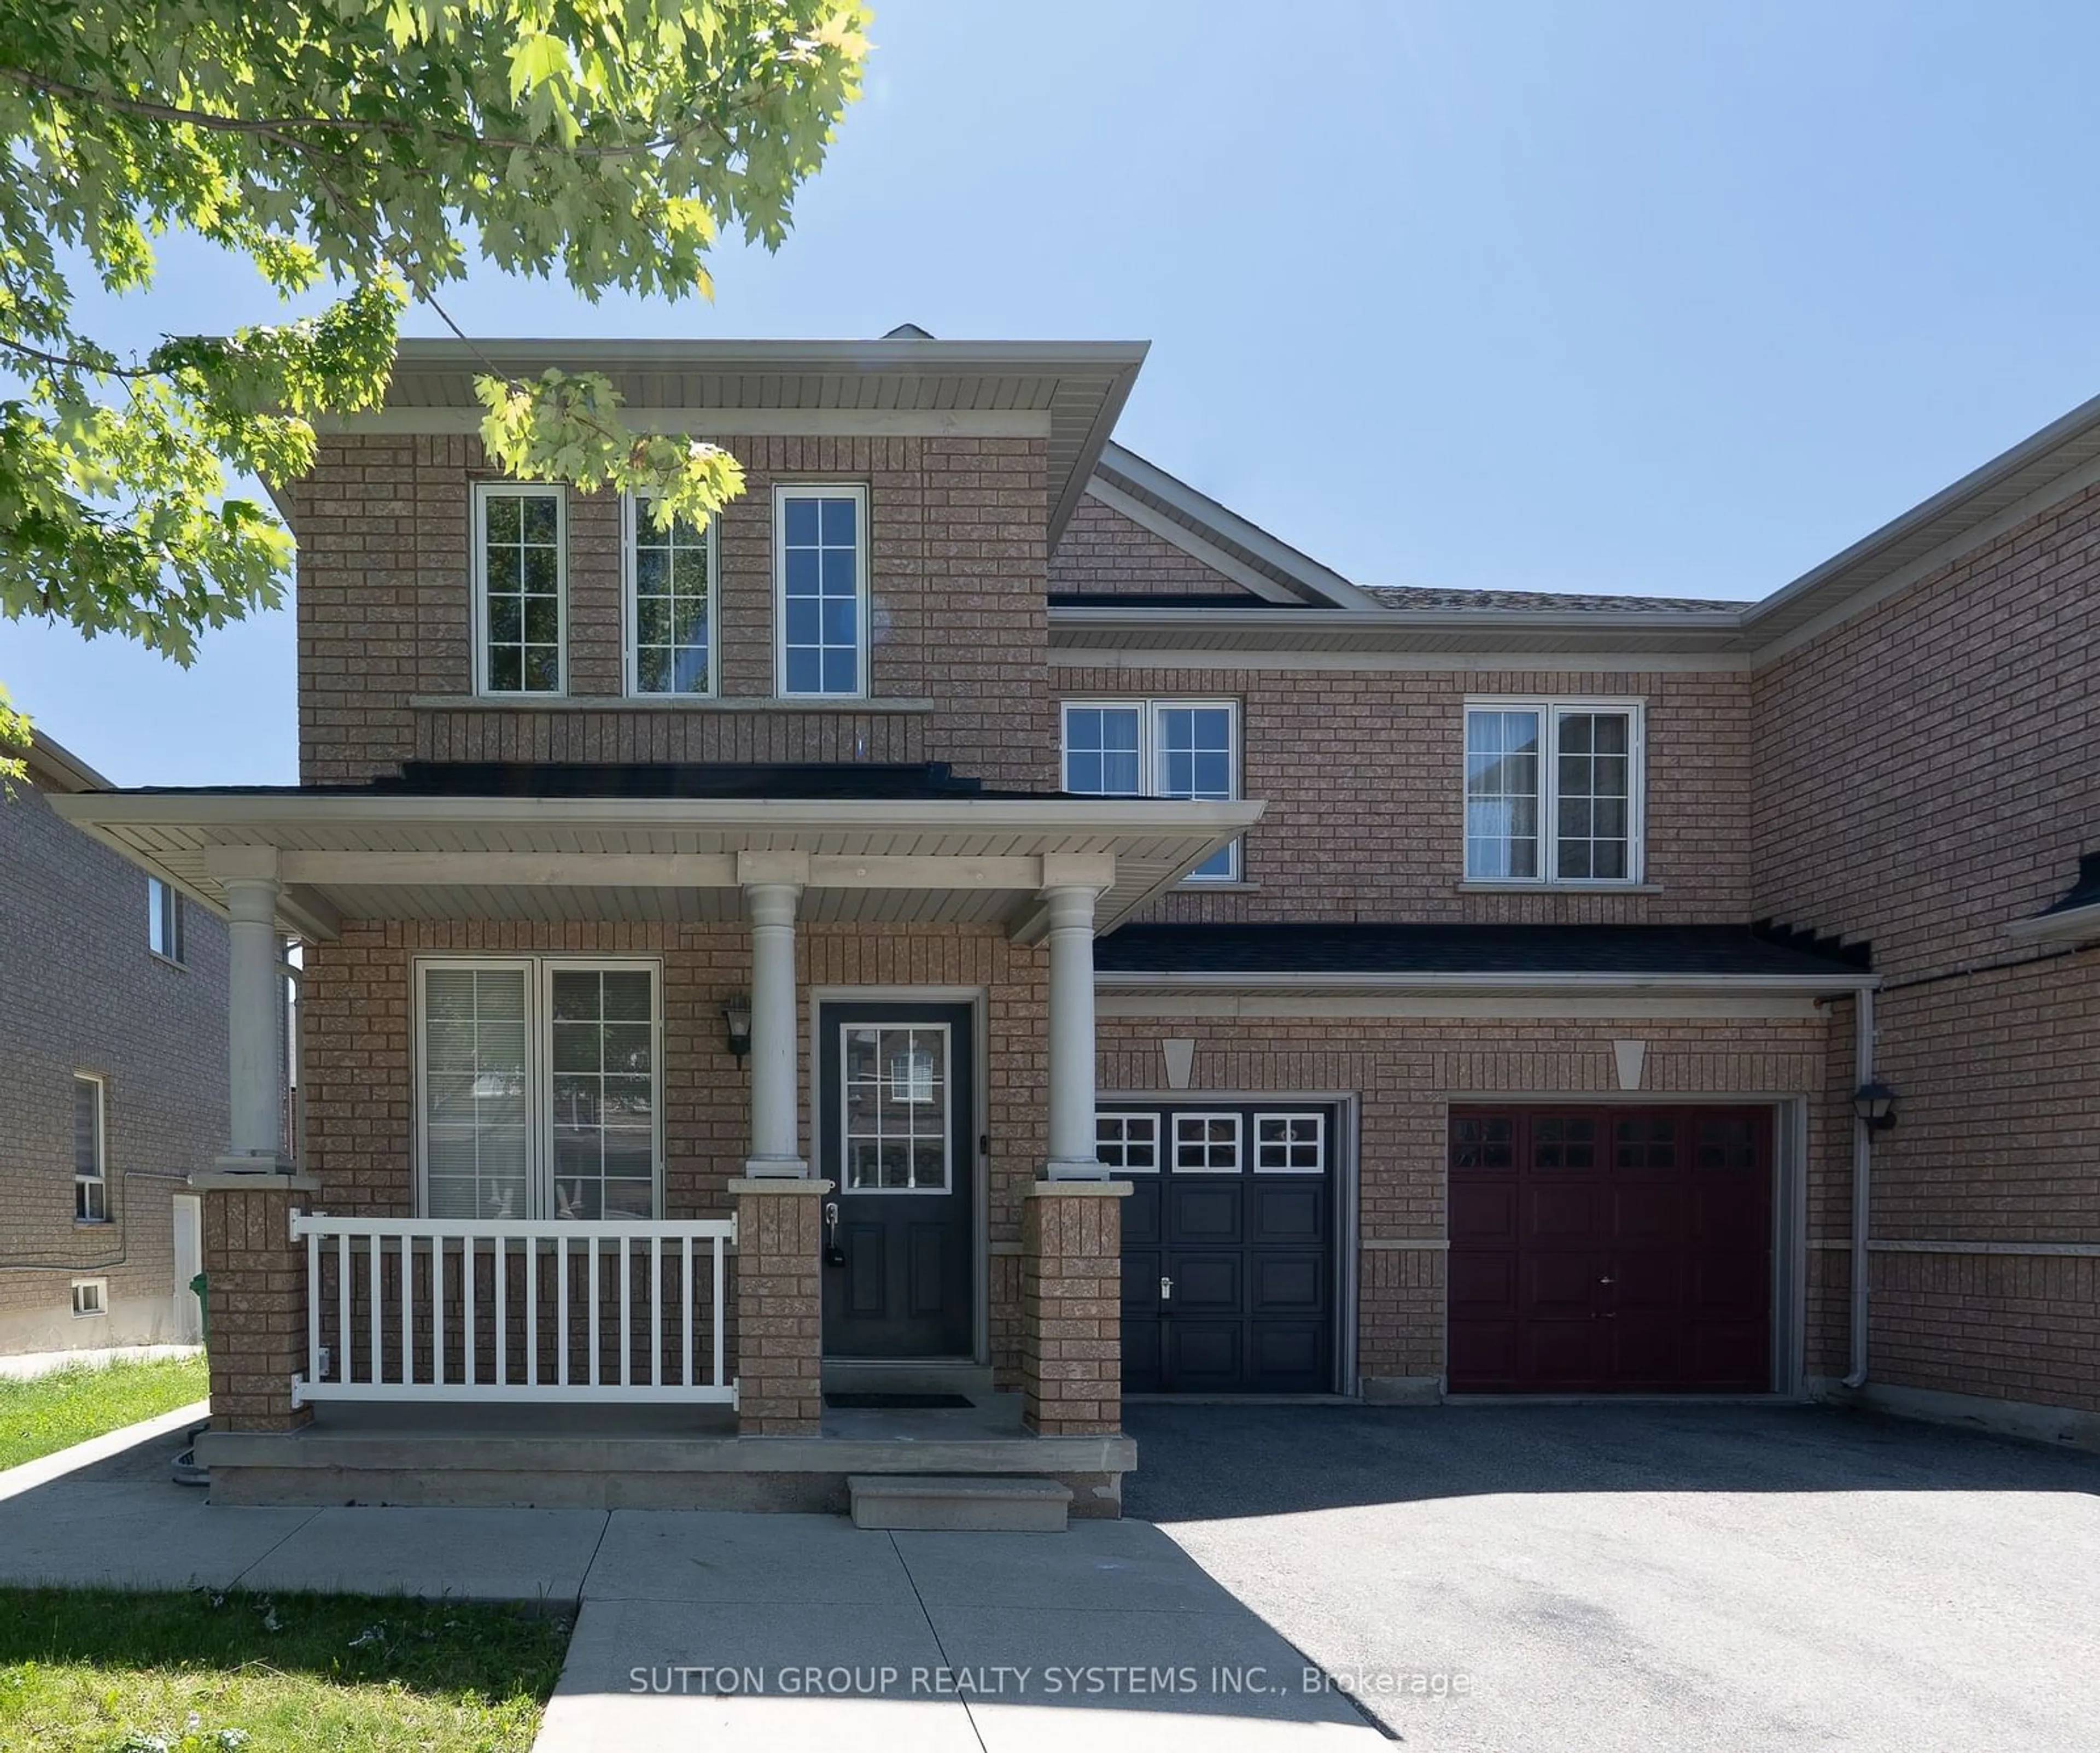 Home with brick exterior material for 93 Starhill Cres, Brampton Ontario L6R 2P8